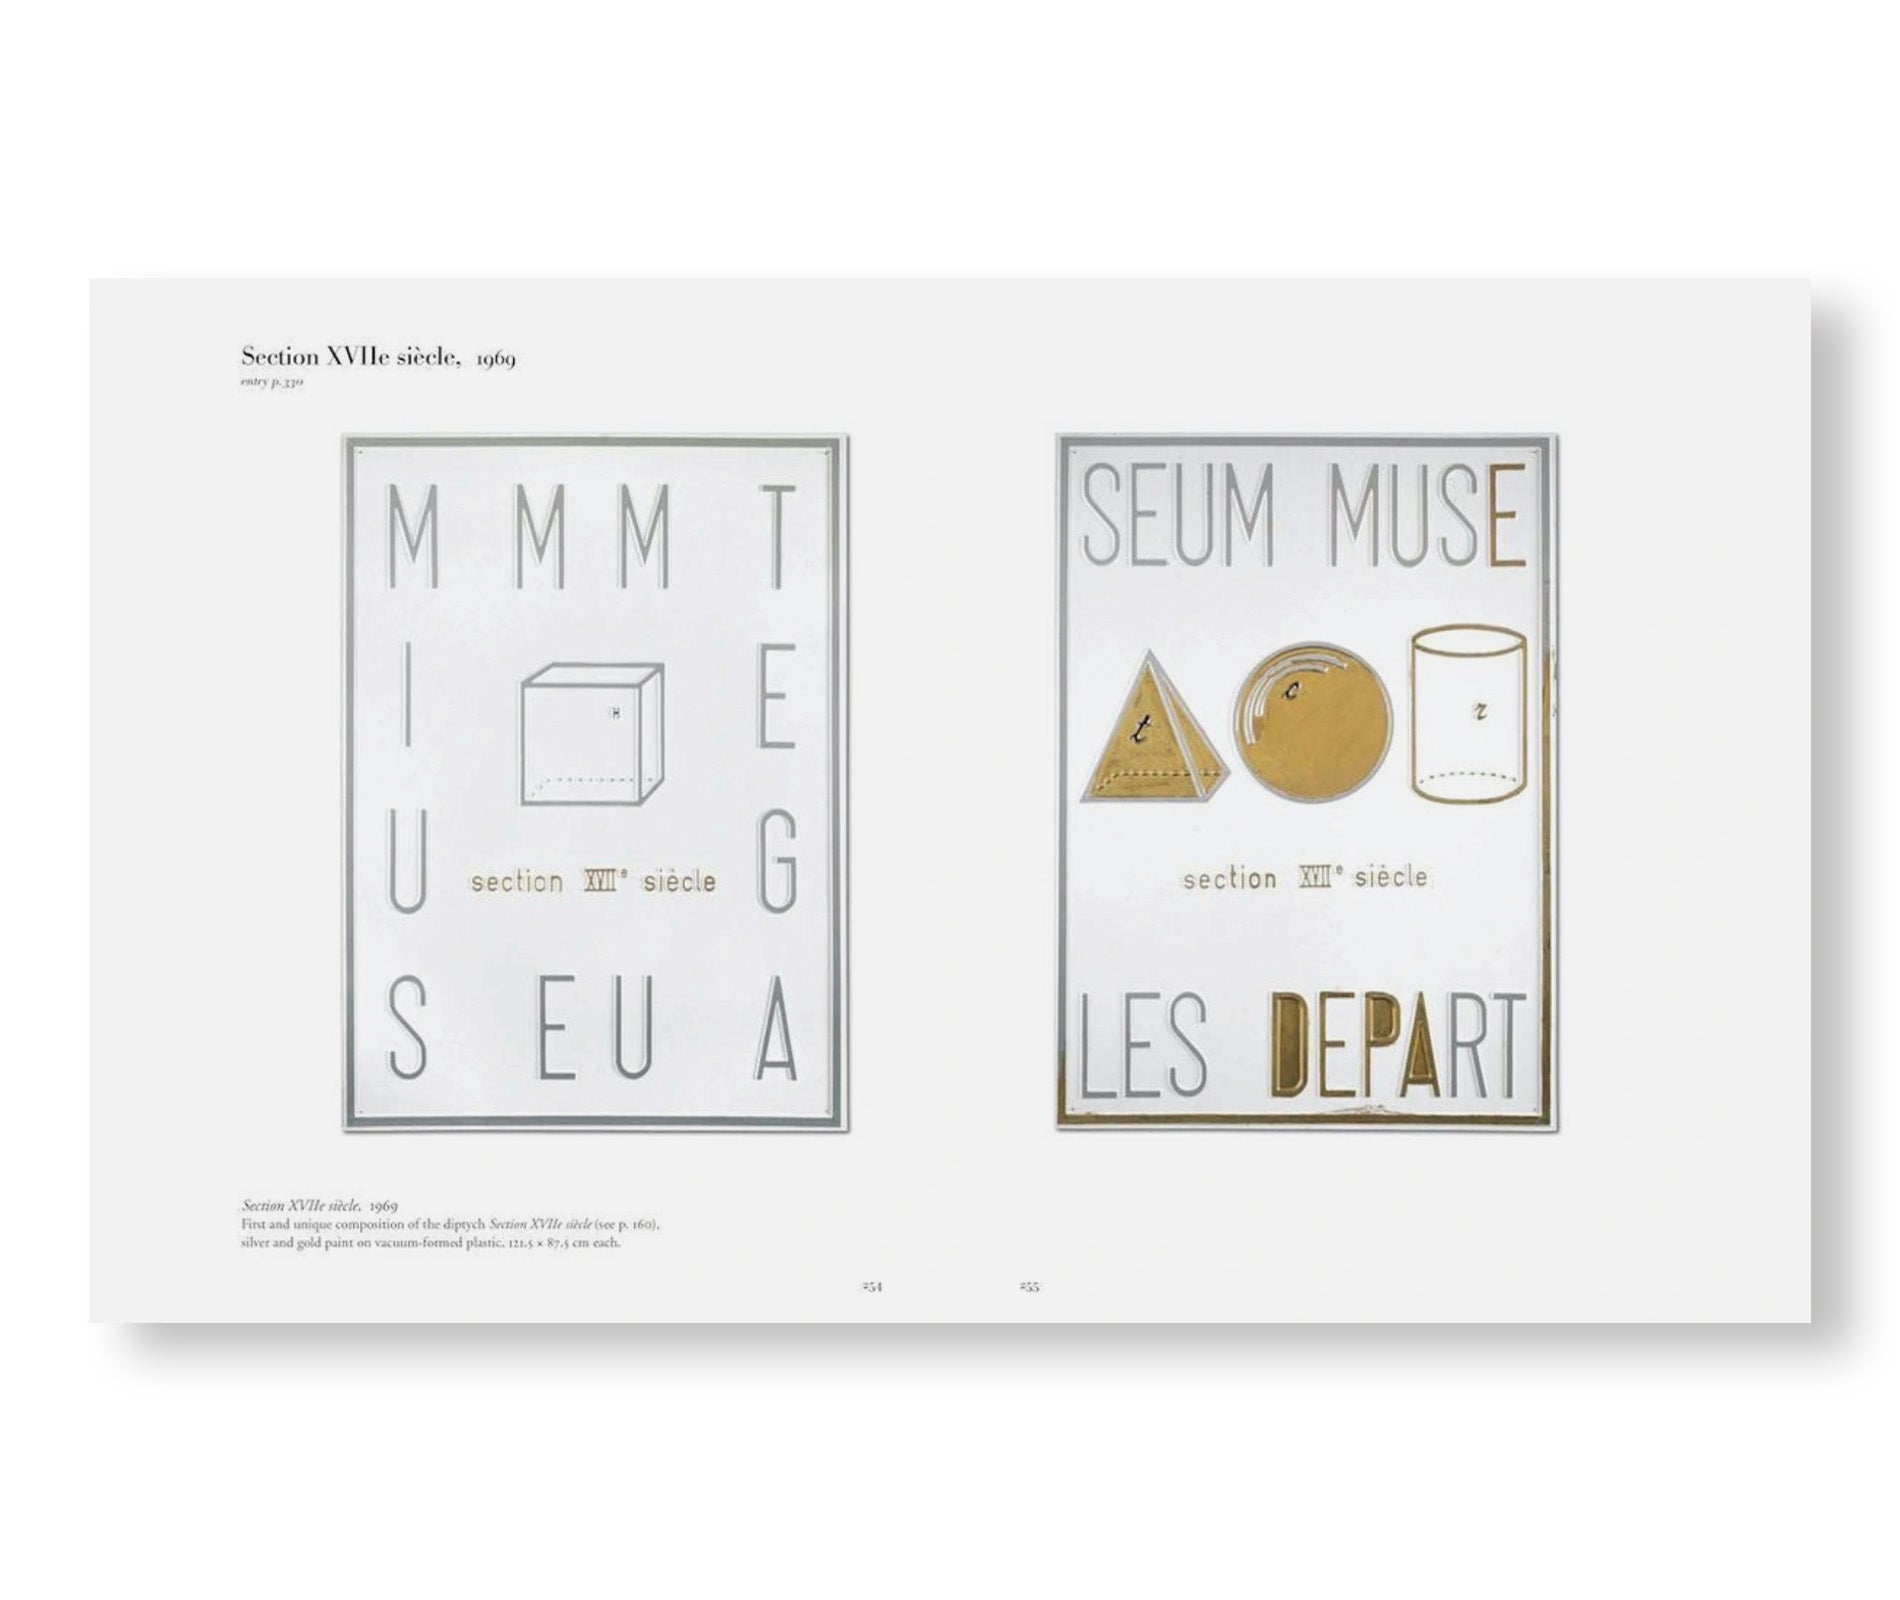 INDUSTRIAL POEMS. THE COMPLETE CATALOGUE OF THE PLAQUES 1968–1972 by Marcel Broodthaers